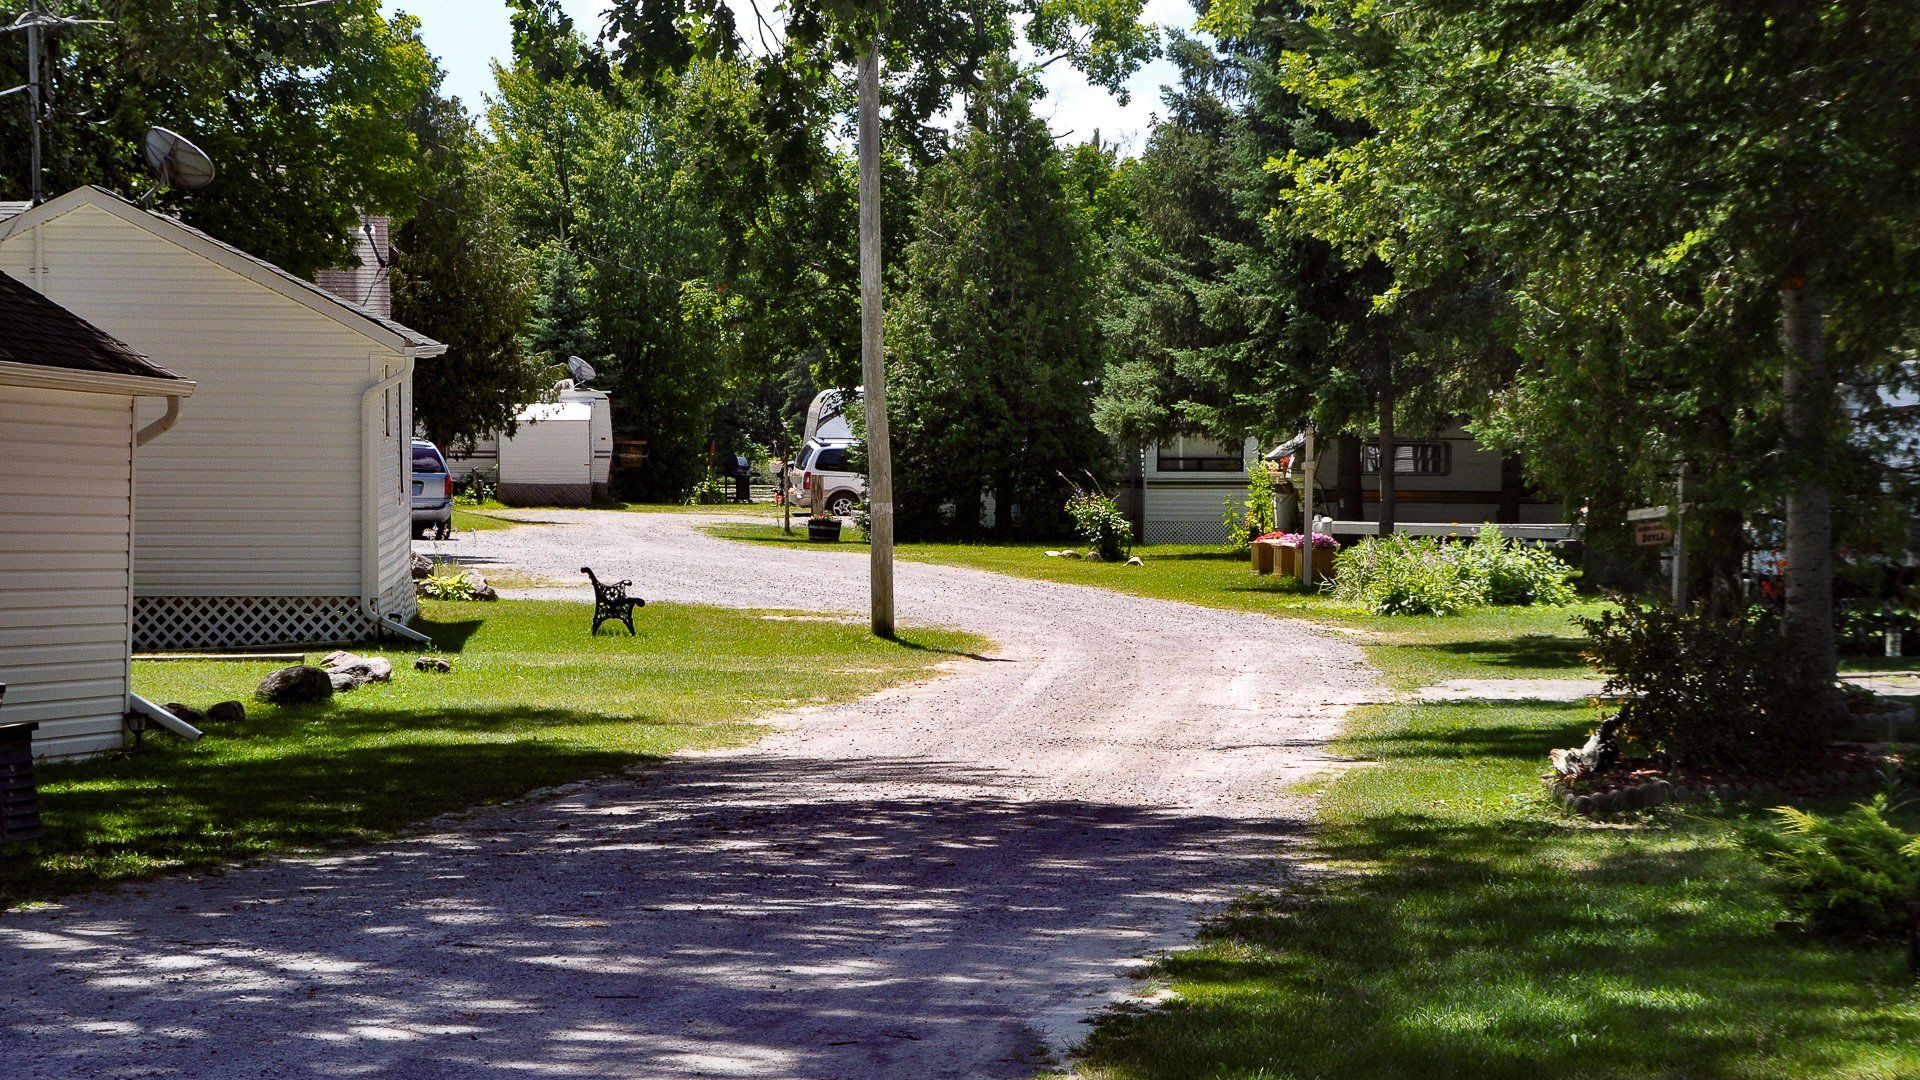 A dirt road going through a residential area with houses and trees